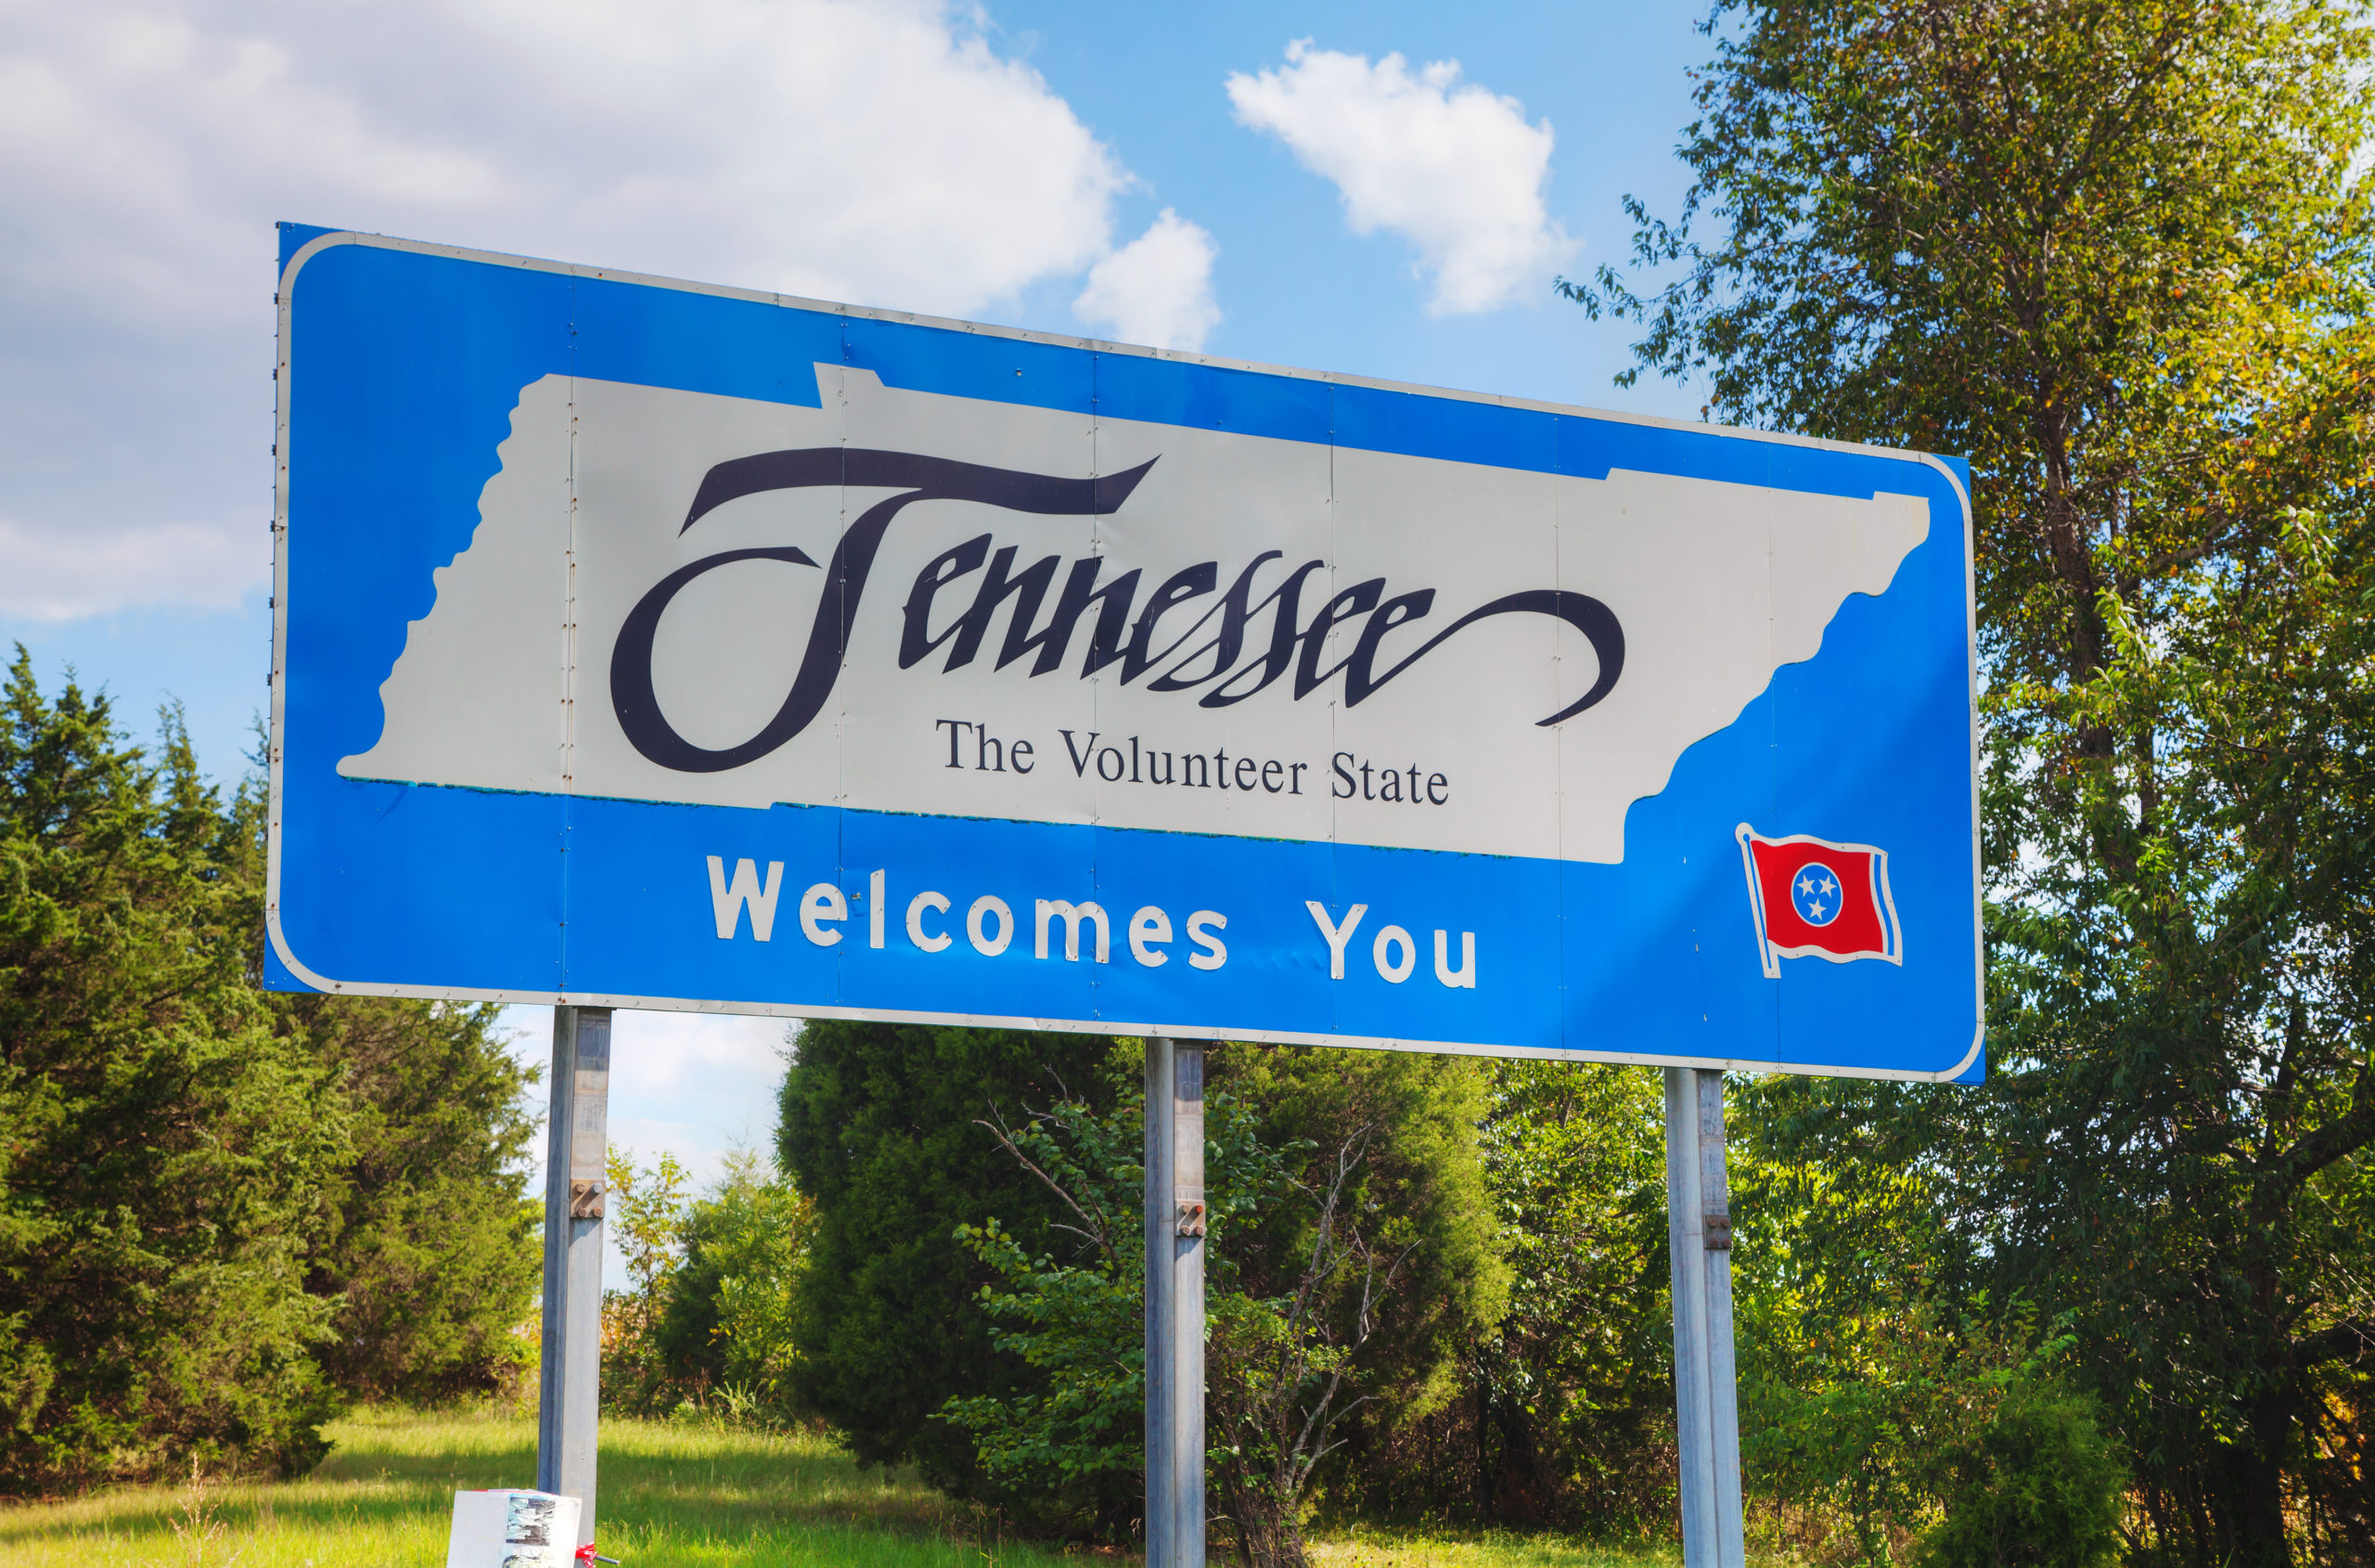 Tennessee Governor Claims To Have Cut State’s Meth Problem ‘In Half’